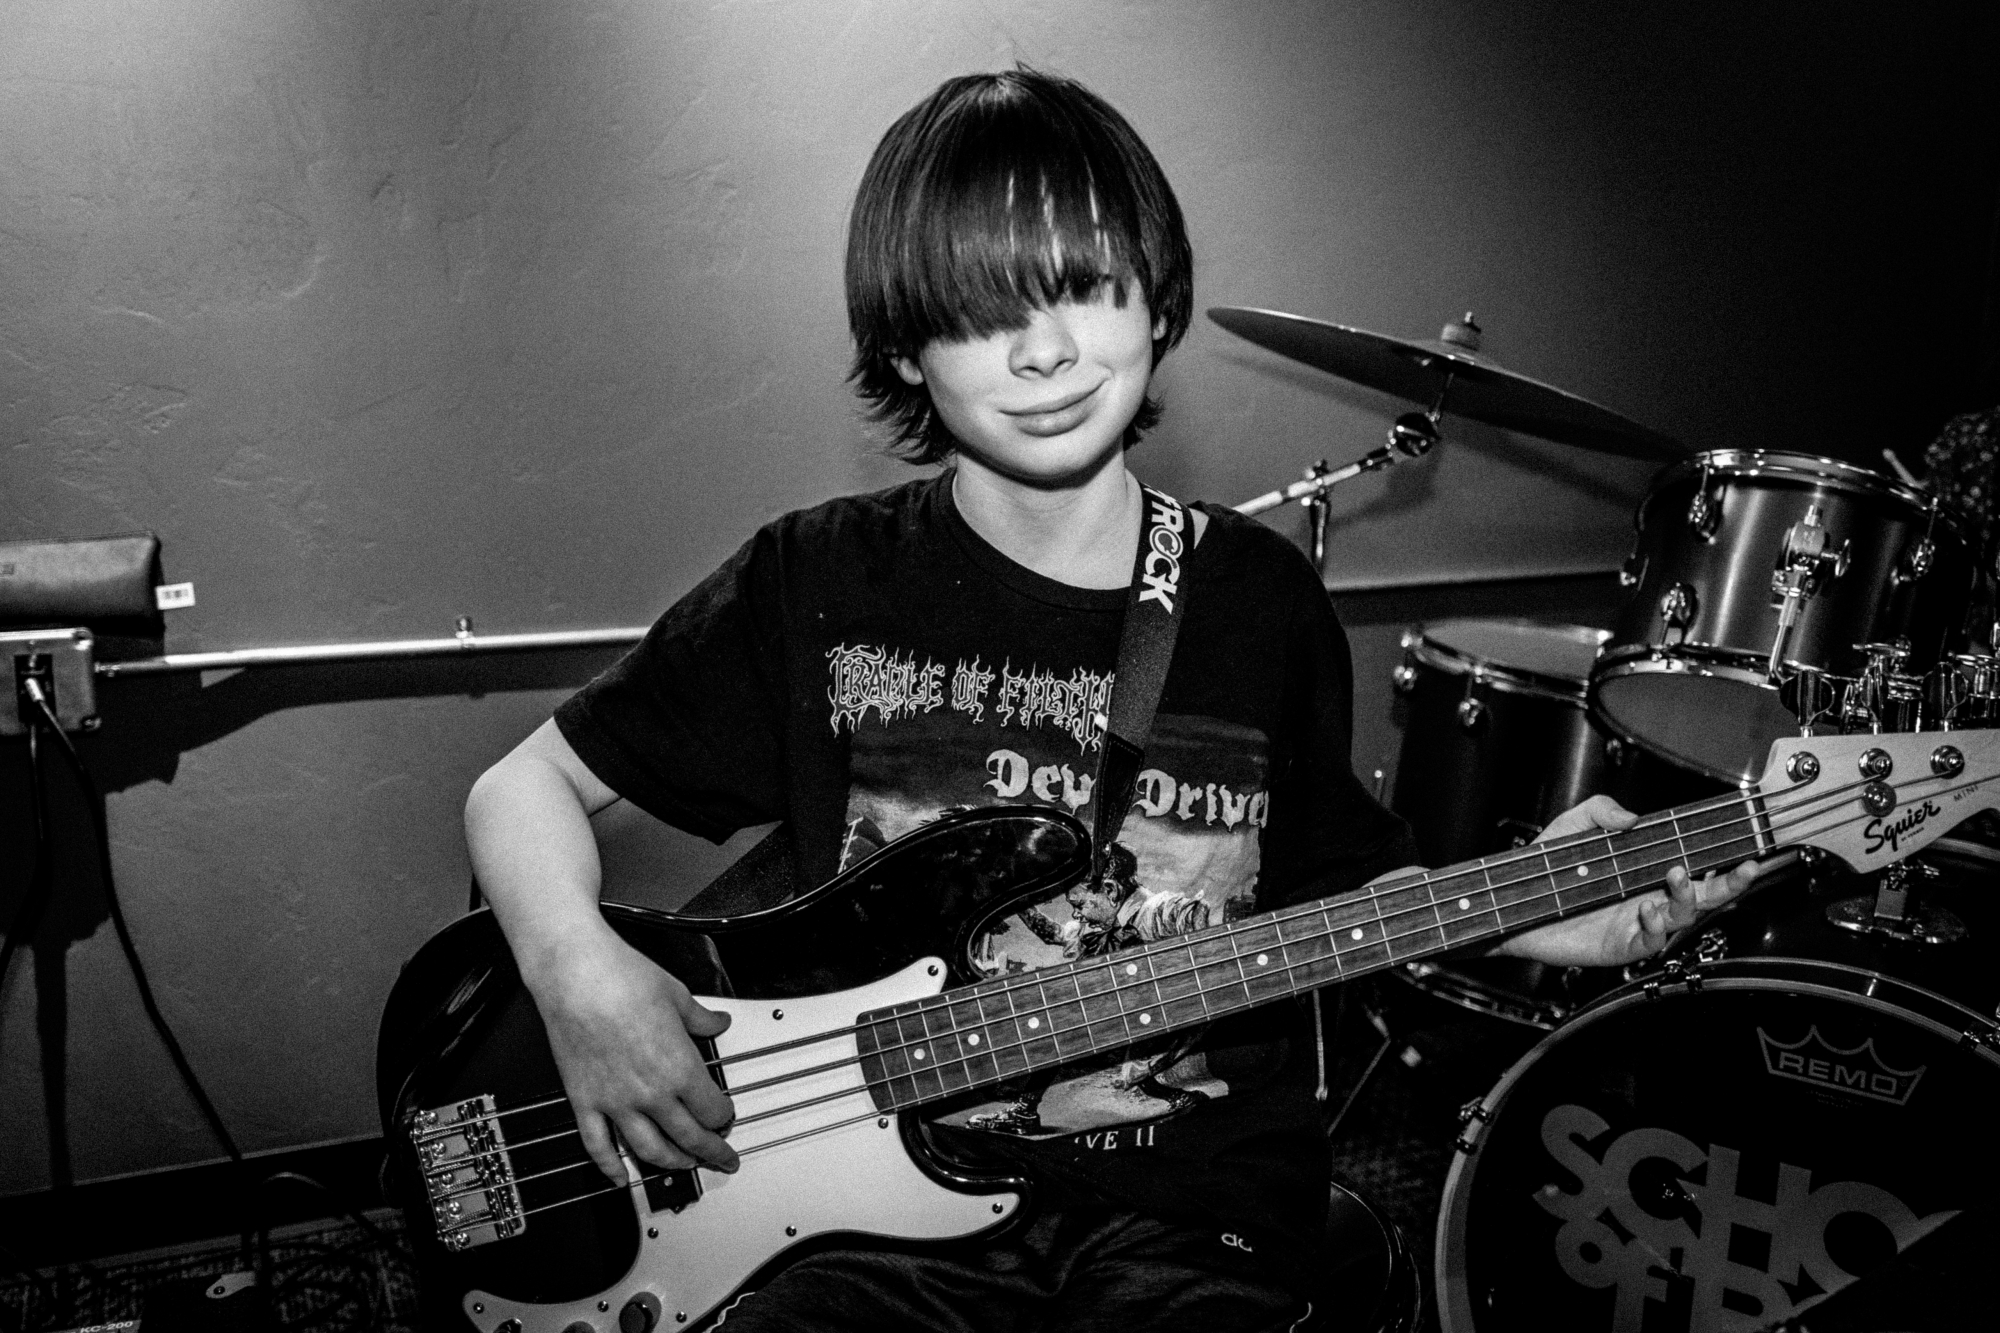 Connor on bass!